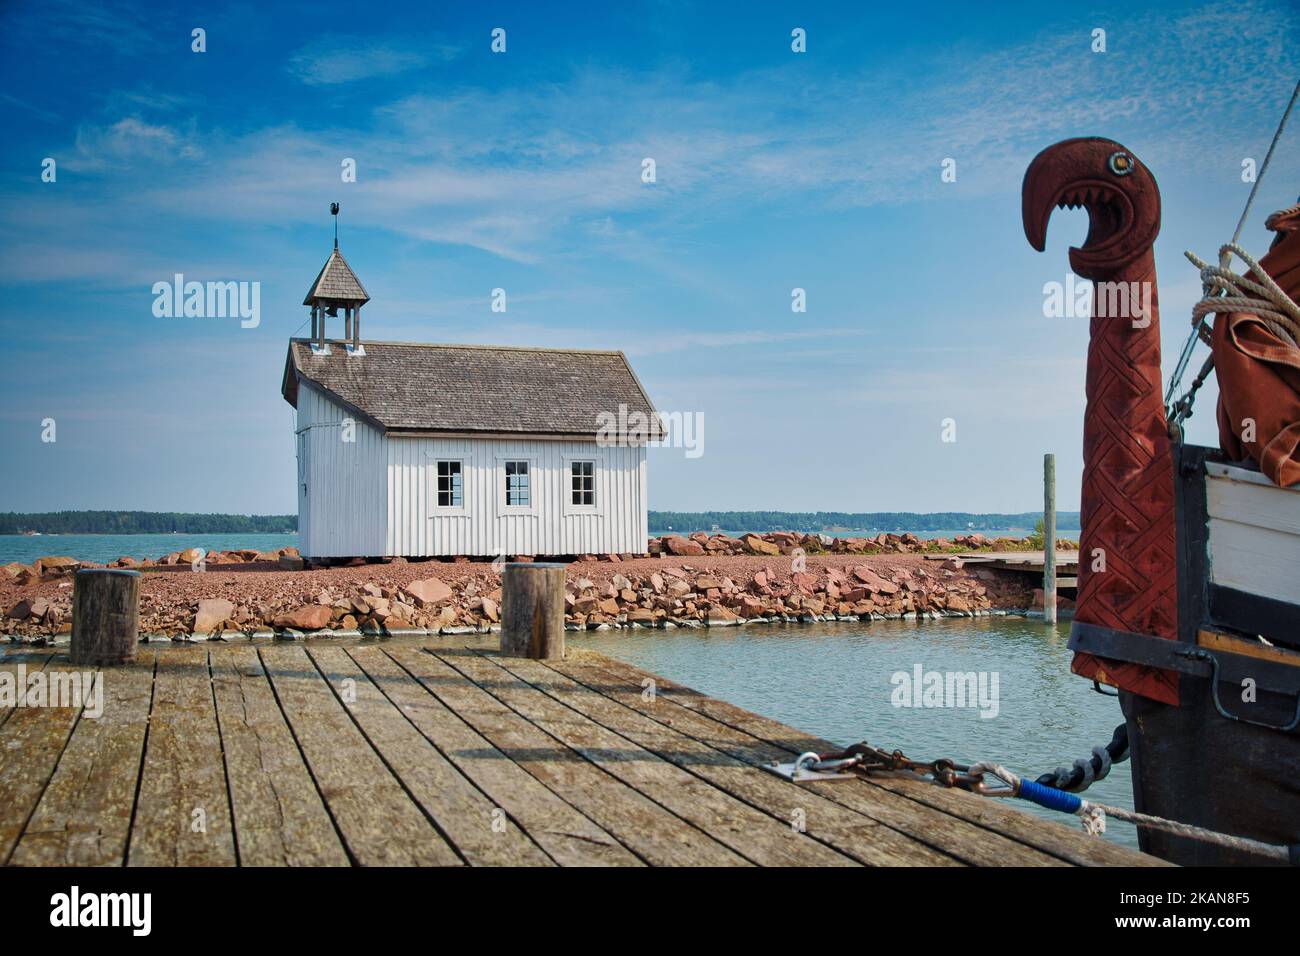 A small wooden church on an island with a viking longship at the docks with a dragon's head on the prow Stock Photo